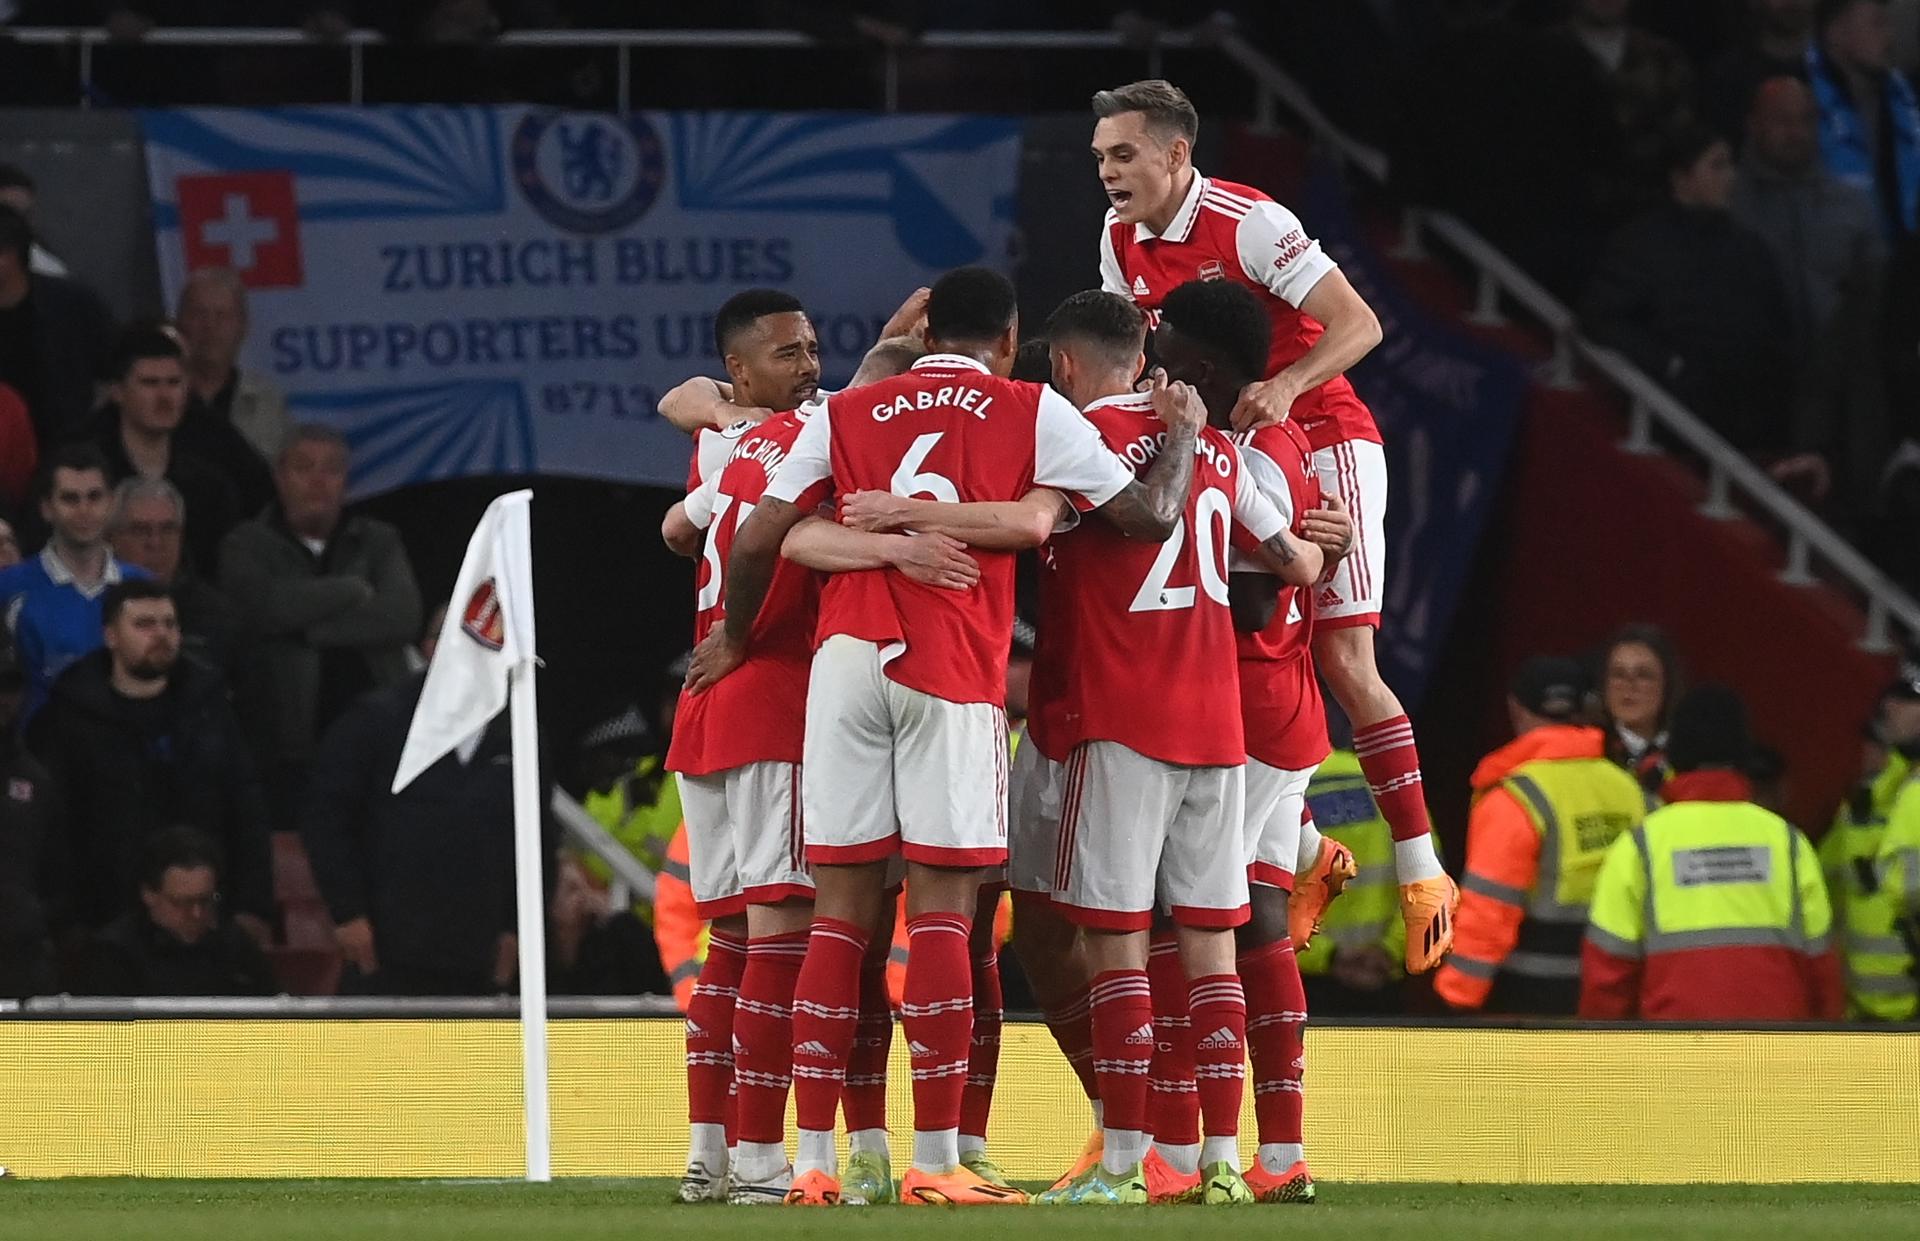 Arsenal's Gabriel Jesus (L) celebrates with teammates after scoring against Chelsea during a Premier League match in London on 2 May 2023. EFE/EPA/NEIL HALL EDITORIAL USE ONLY. No use with unauthorized audio, video, data, fixture lists, club/league logos or 'live' services. Online in-match use limited to 120 images, no video emulation. No use in betting, games or single club/league/player publications.
